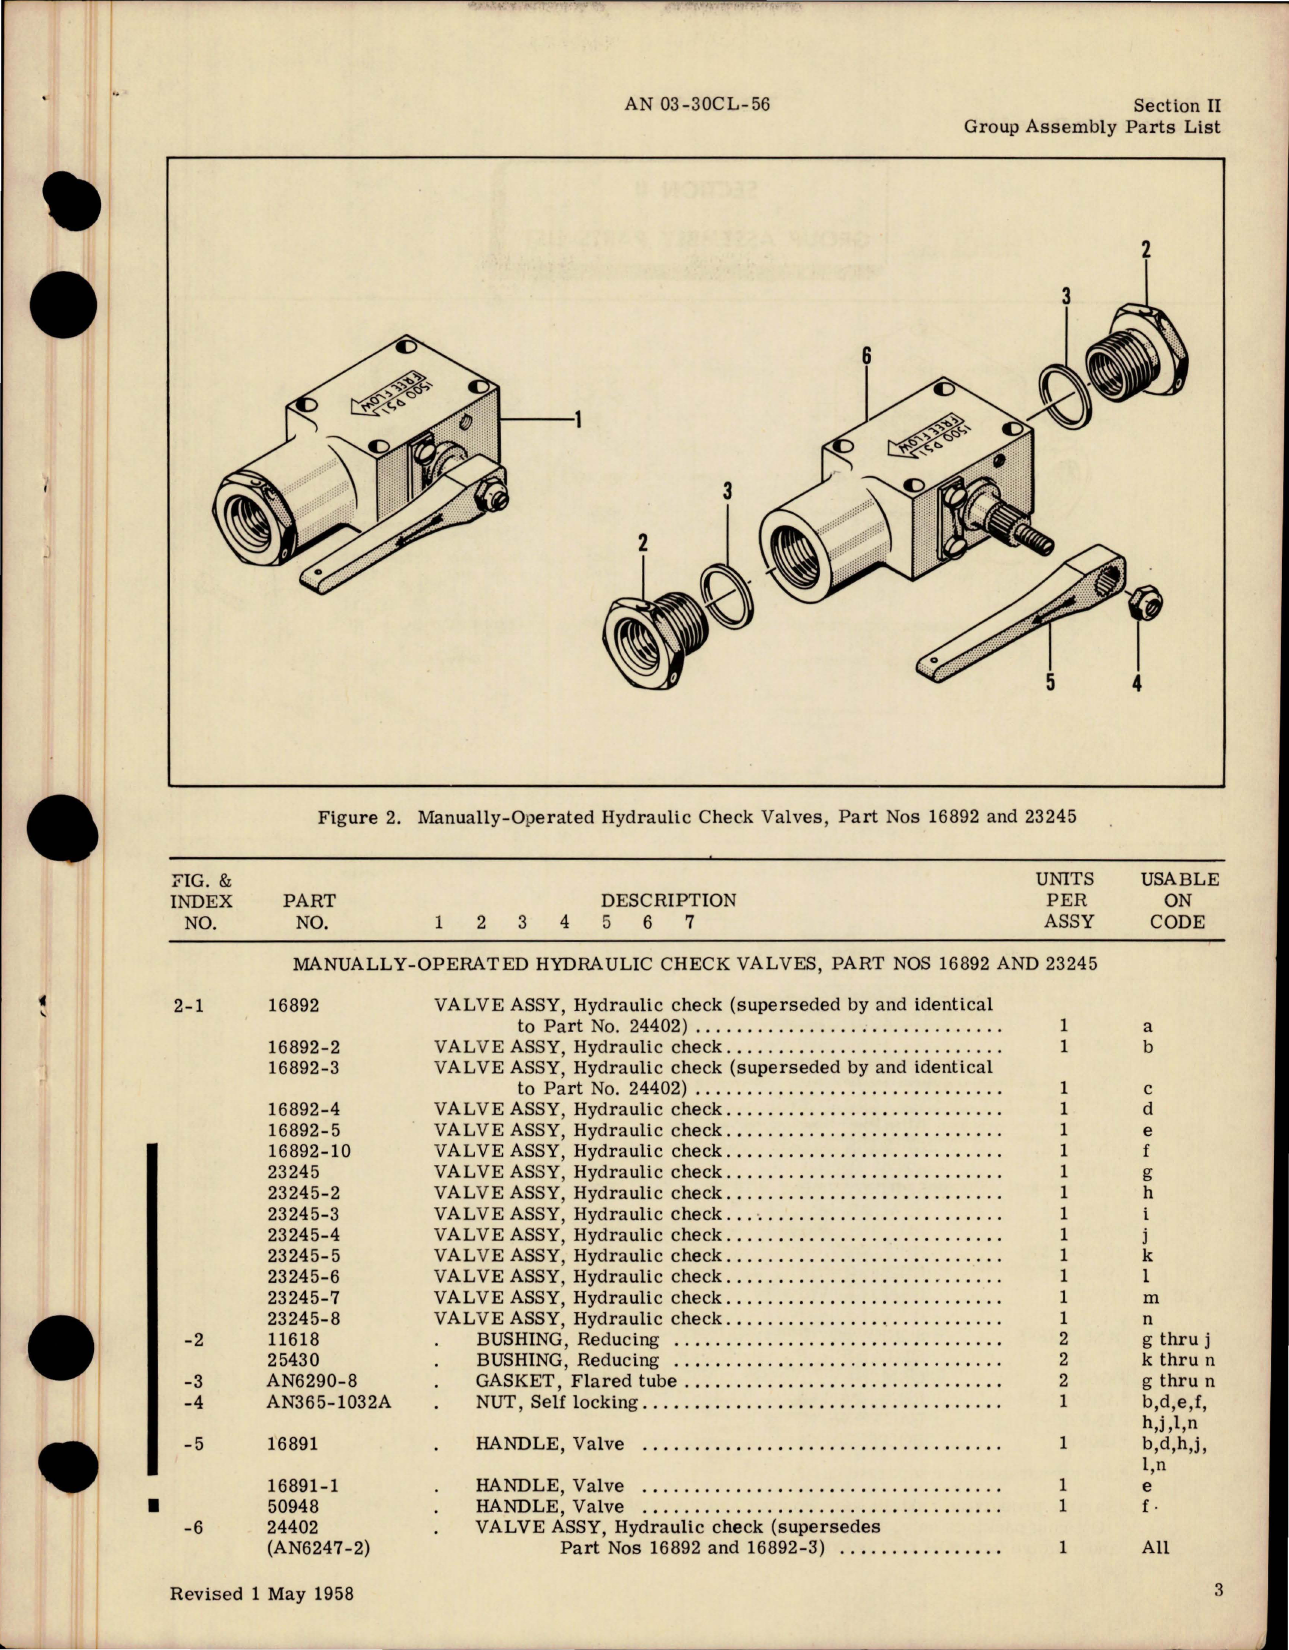 Sample page 5 from AirCorps Library document: Illustrated Parts Breakdown for Manually Operated Hydraulic Check Valves